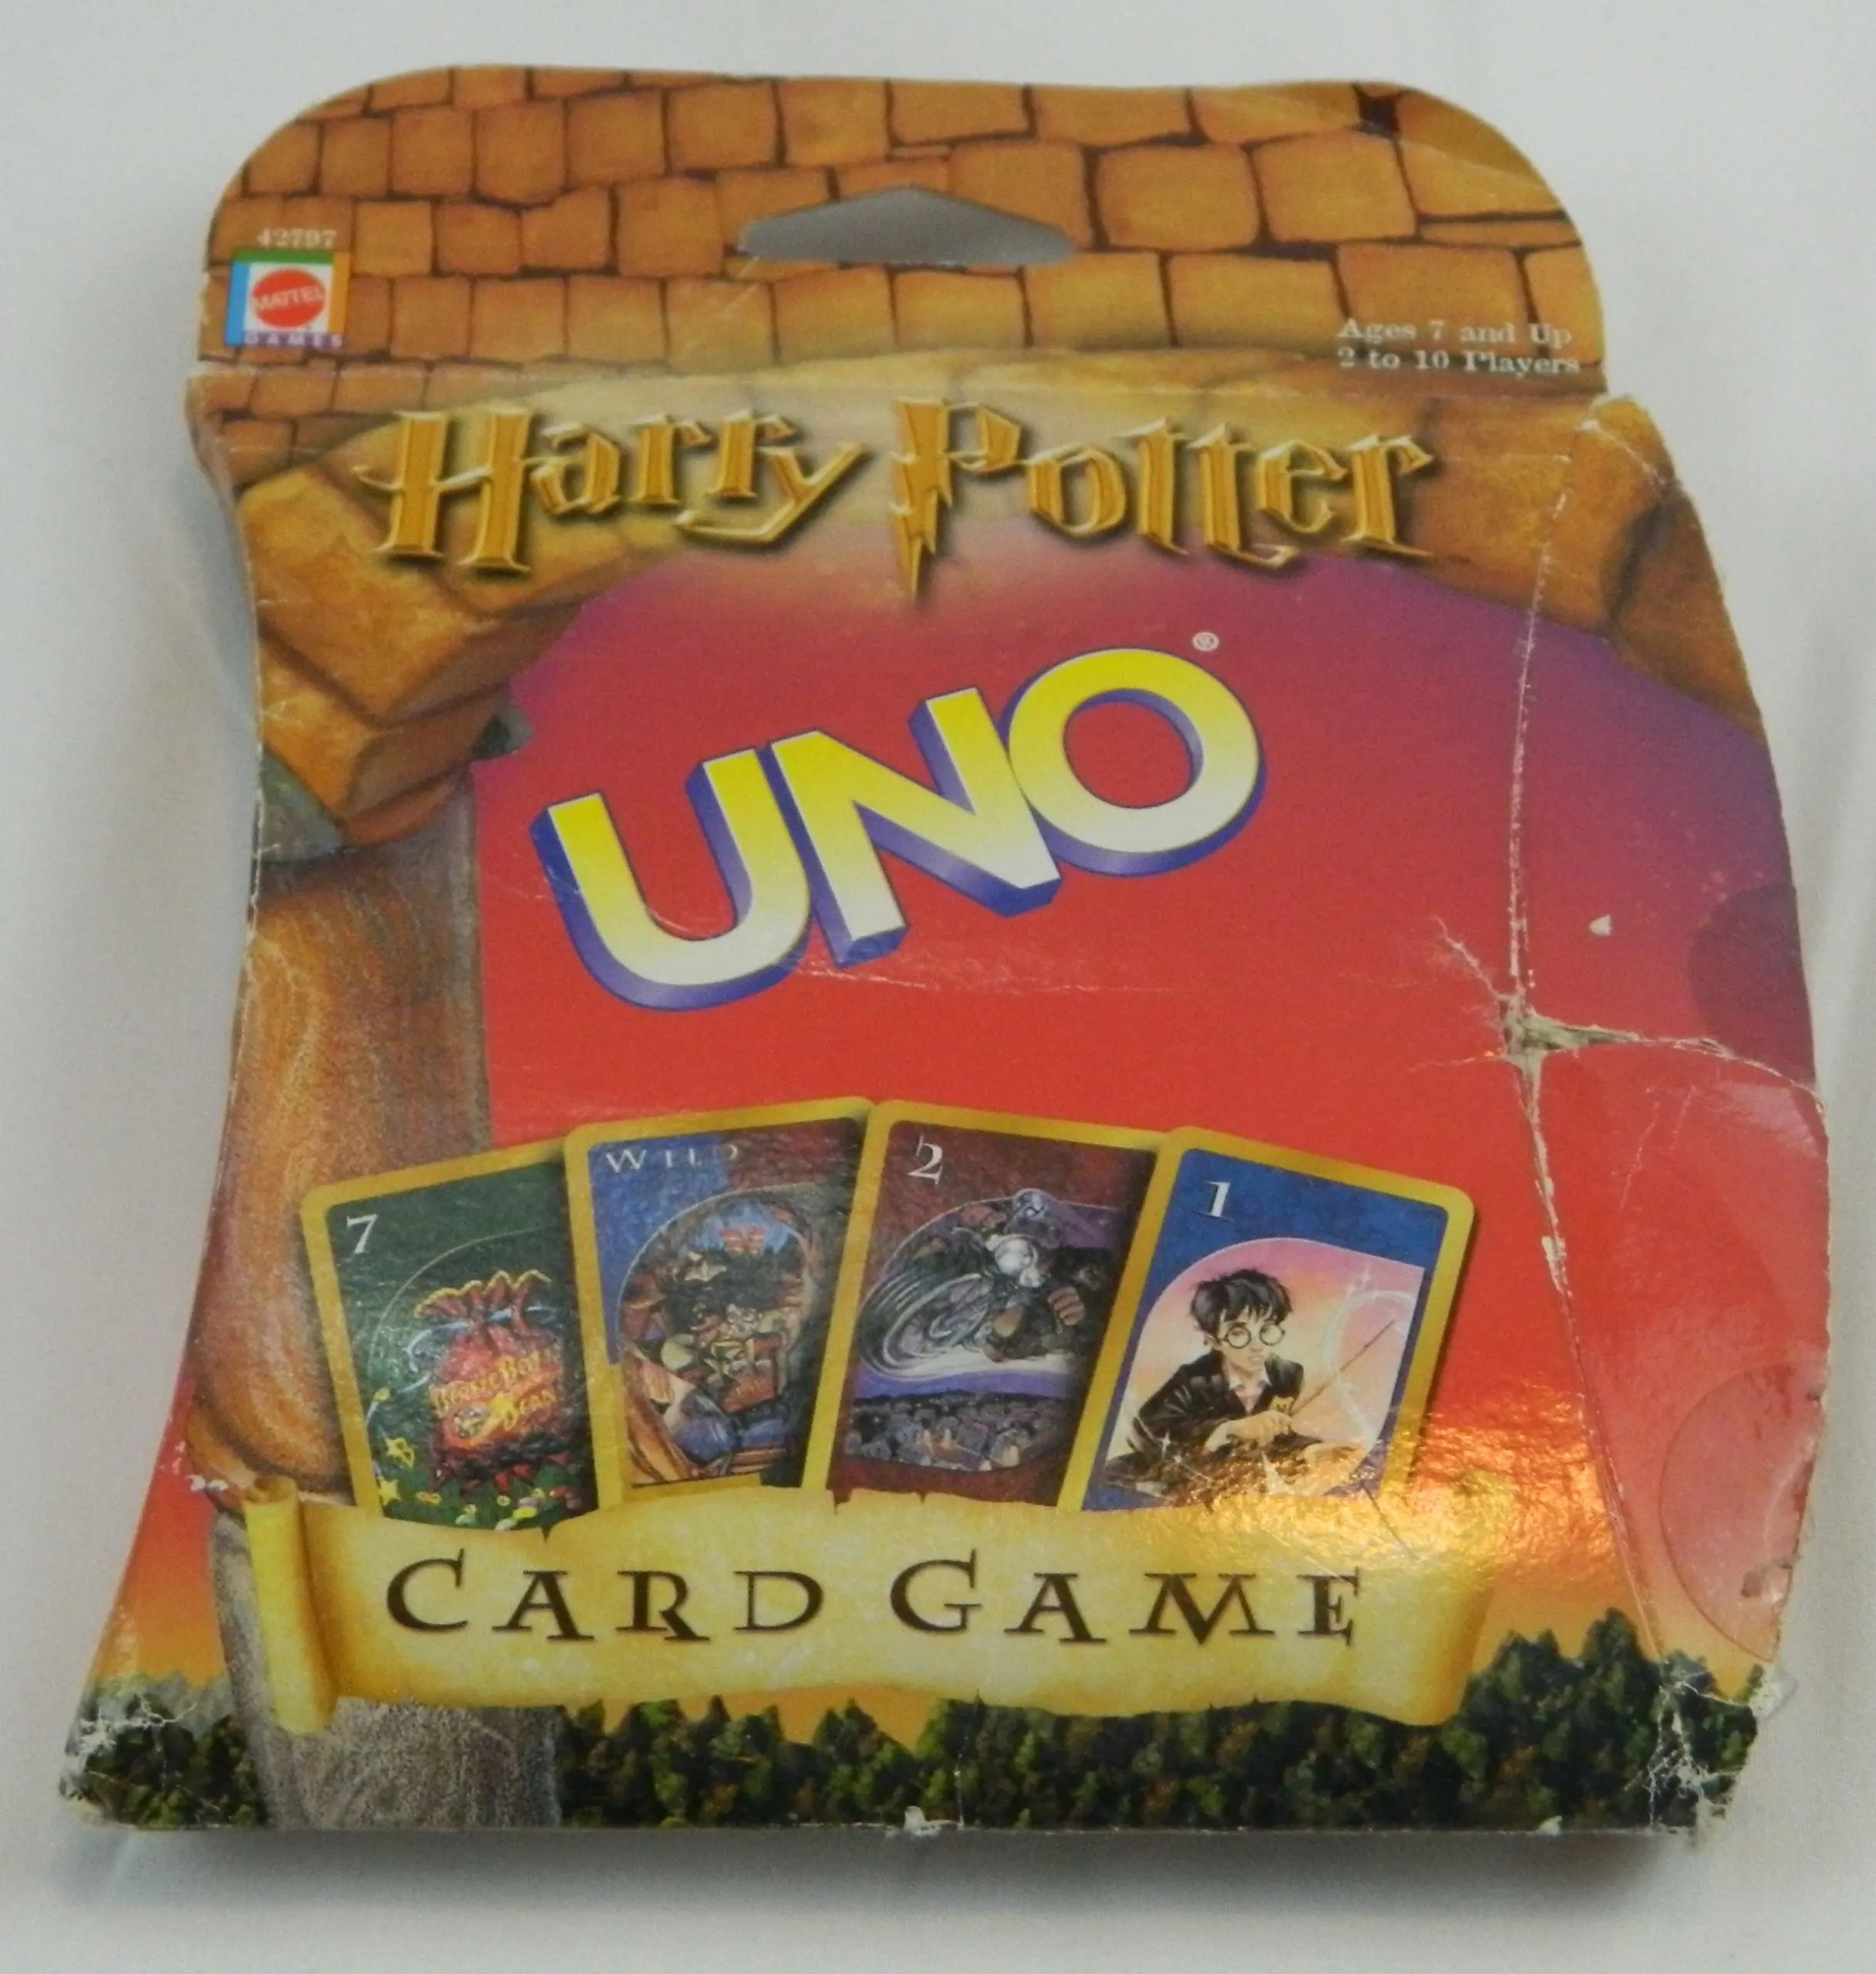 Harry Potter UNO Card Game Review and Rules - Geeky Hobbies